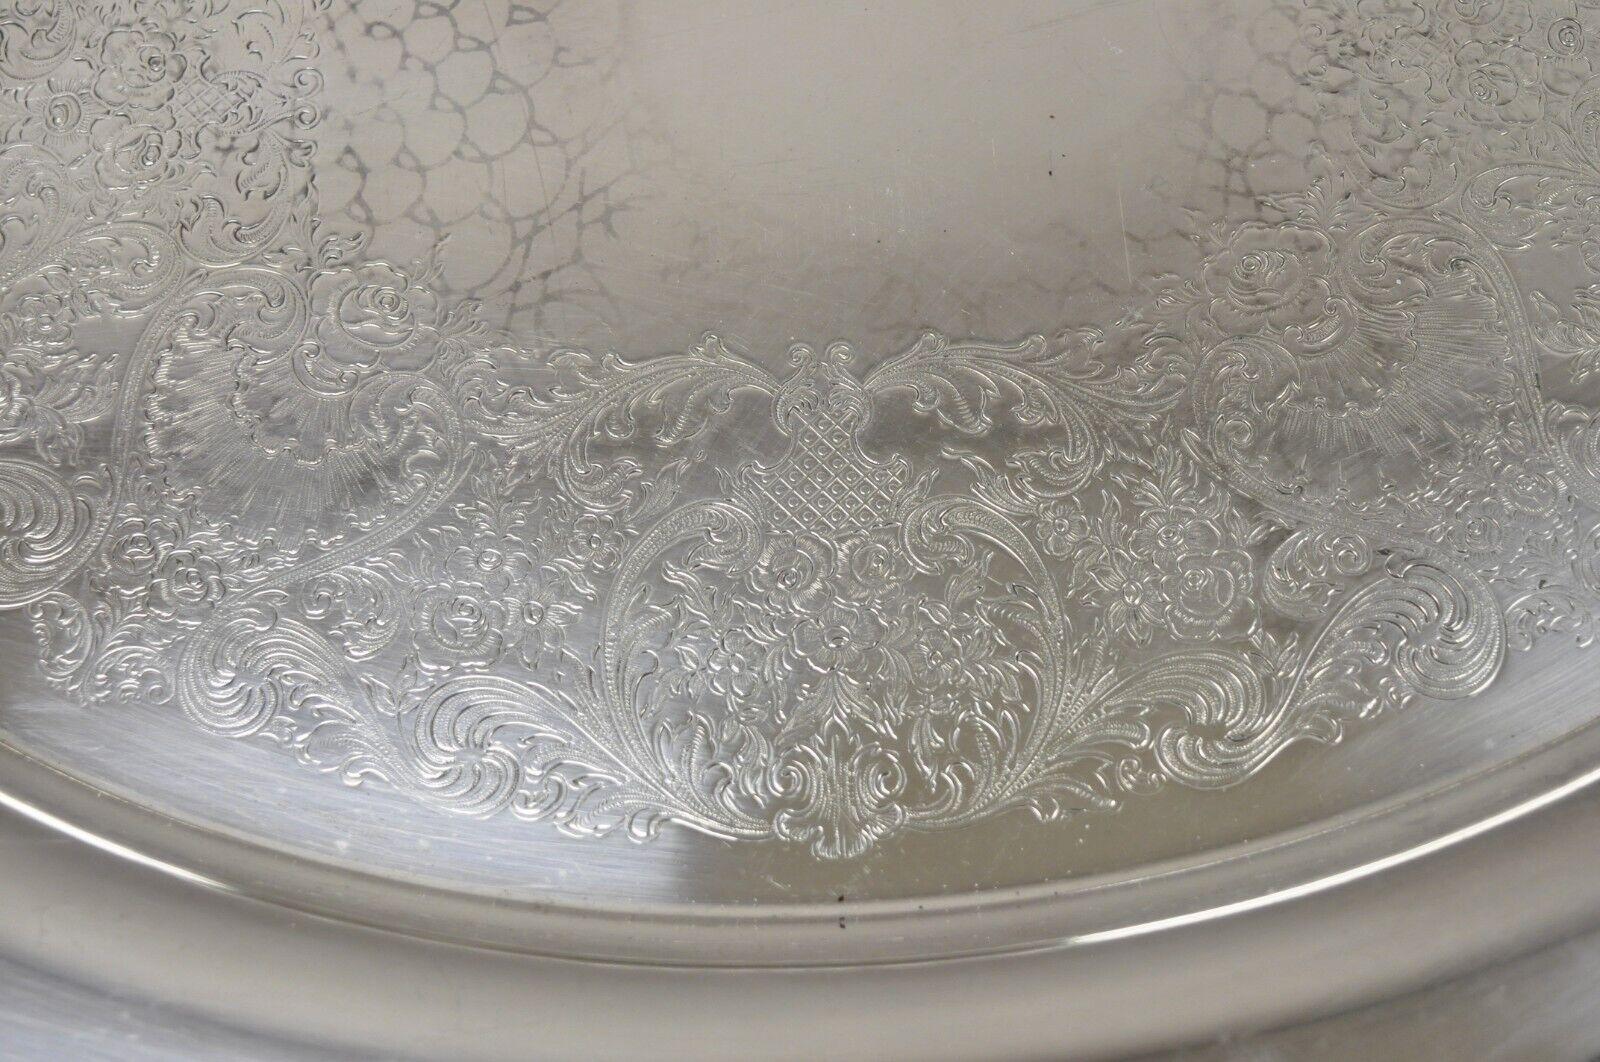 Vintage Webster Wilcox International Silver Plated Oval Twin Handle Platter Tray 1